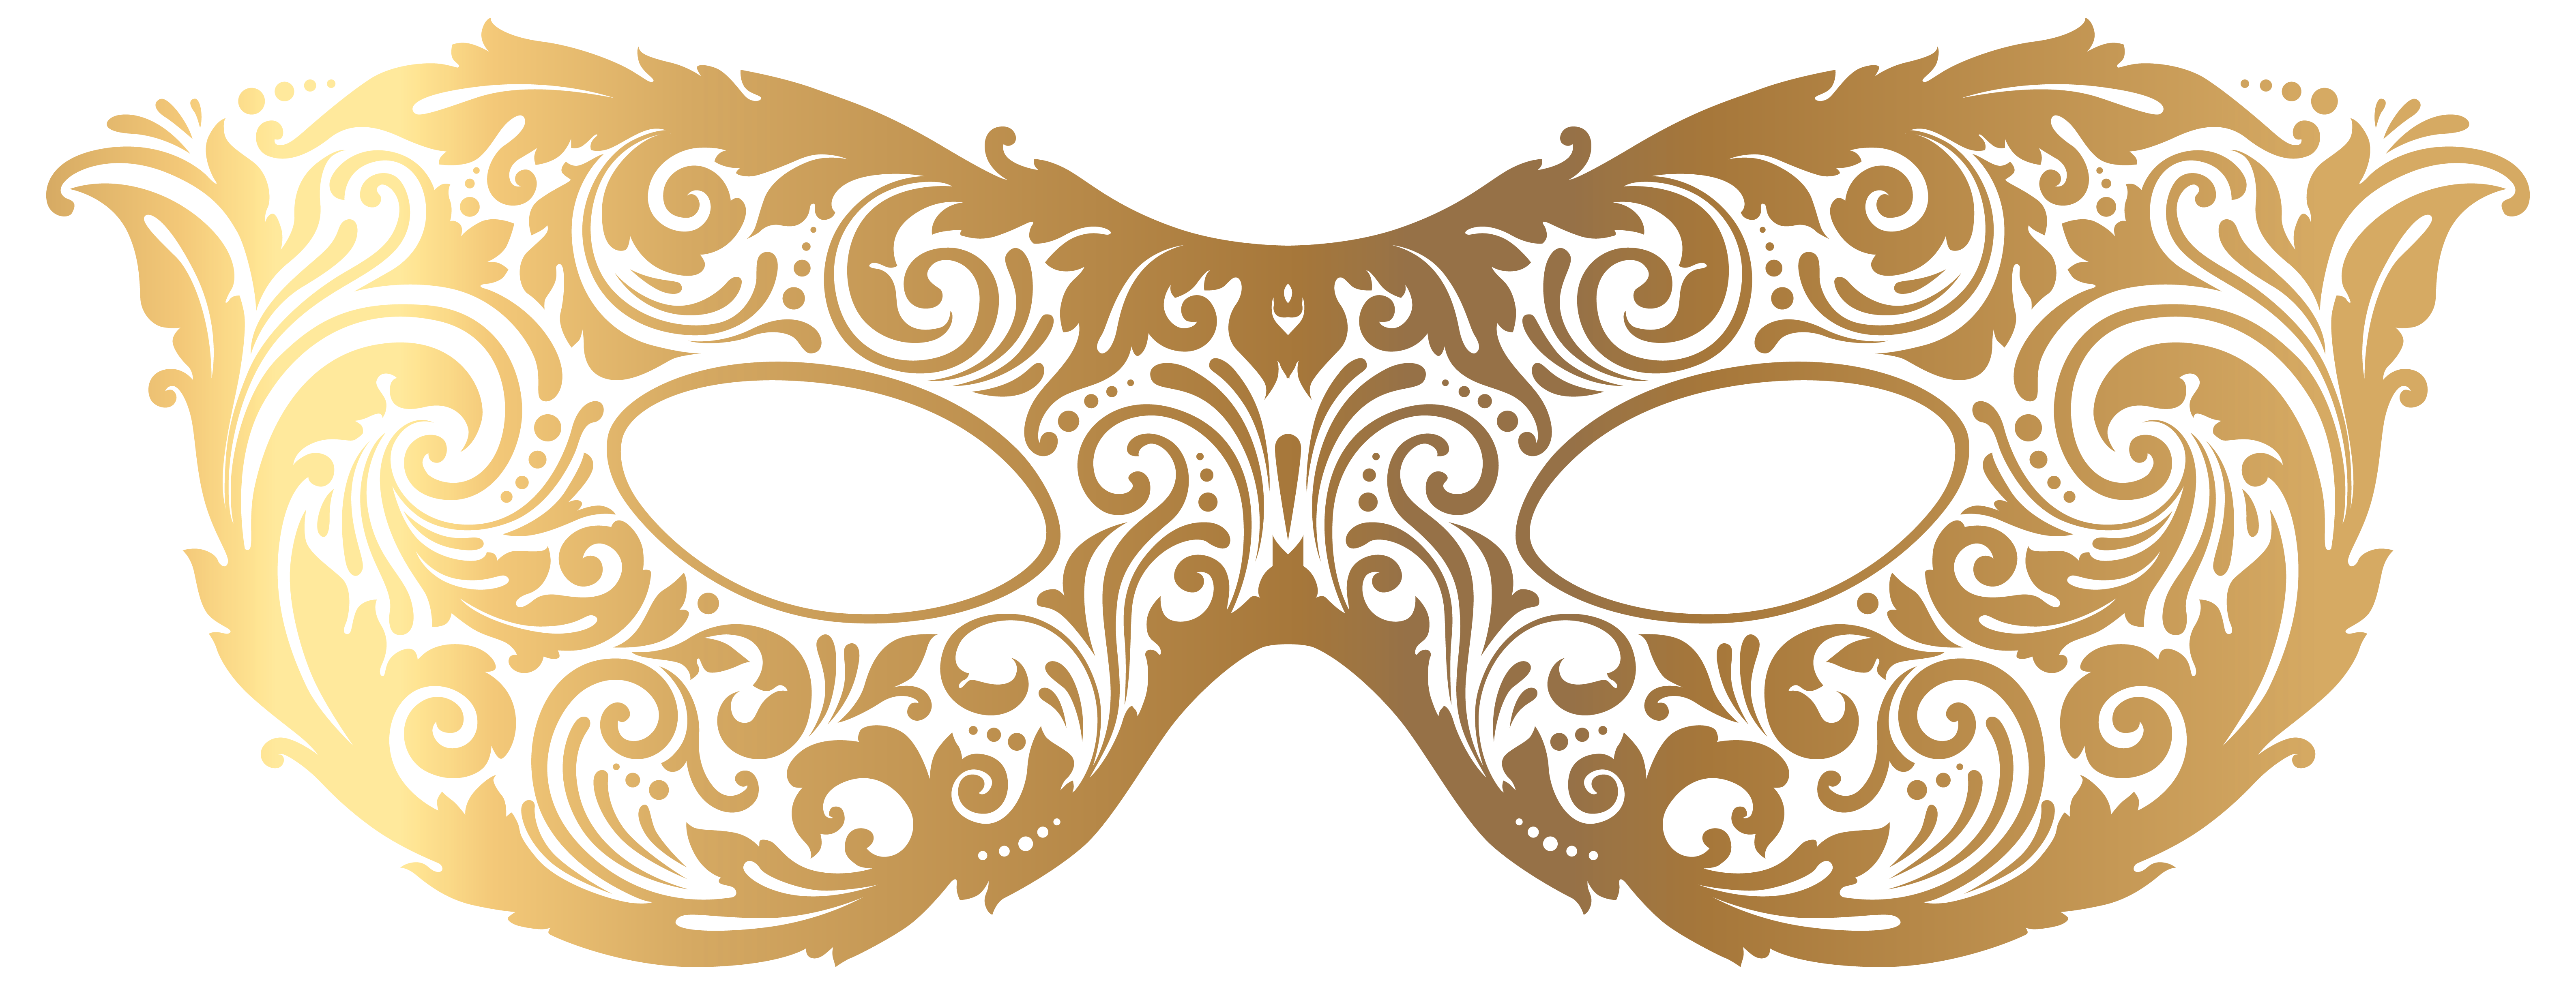 Gold Carnival Mask Image Png Image Clipart